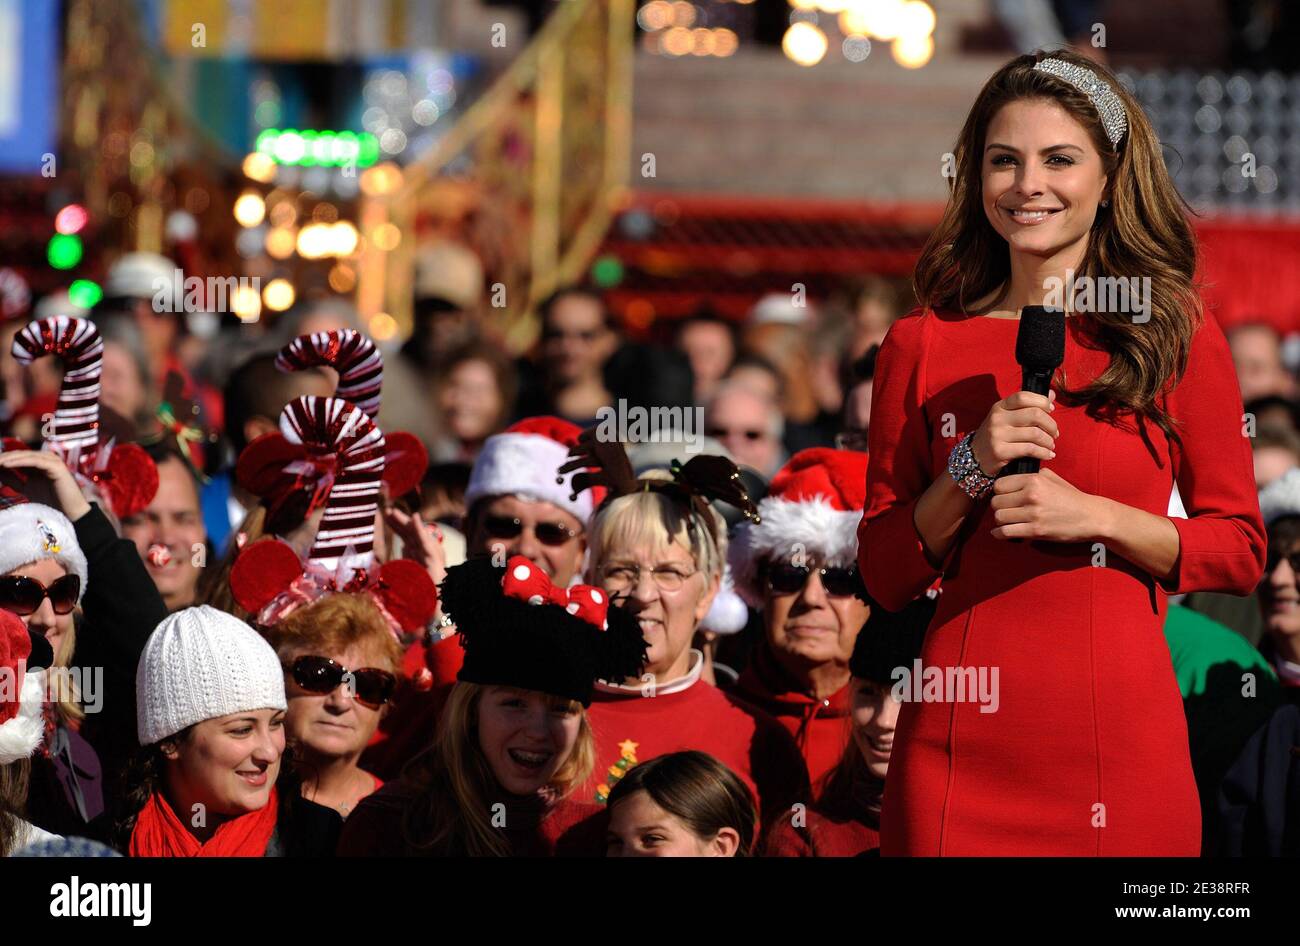 Television host/actress Maria Menounos tapes a segment of the 'Disney Parks Christmas Day Parade' at the Magic Kingdom in Lake Buena Vista, Fl, USA on December 3, 2010. The annual holiday telecast airs Dec. 25, 2010 on ABC-TV. Seacrest hosts the special from the Walt Disney World Resort in Florida and Nick Cannon hosts from Disneyland Resort in California. Performers include Mariah Carey, Amber Riley, Selena Gomez, Lee DeWyze, Debby Ryan and Darius Rucker. Photo by Matt Stroshane/Disney via ABACAPRESS.COM Stock Photo